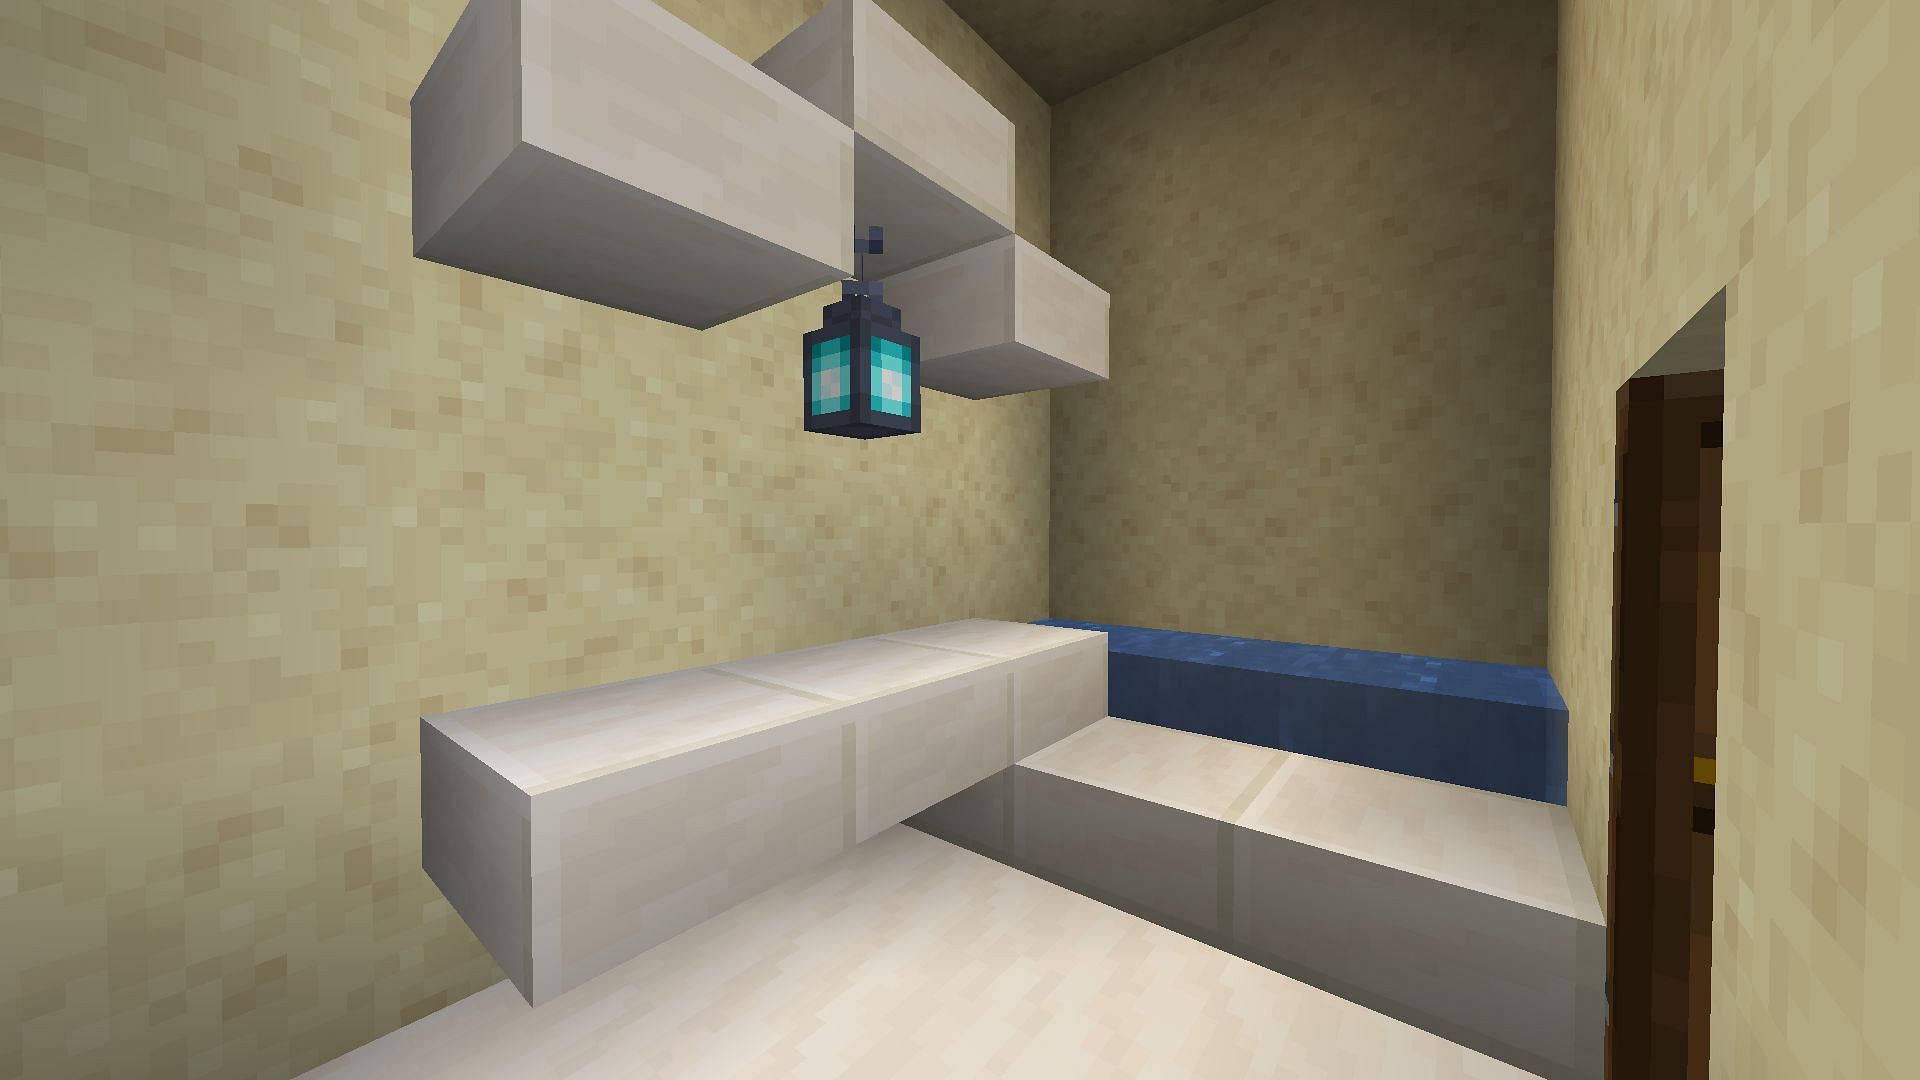 A bathroom connected to the bedroom (Image via Minecraft)